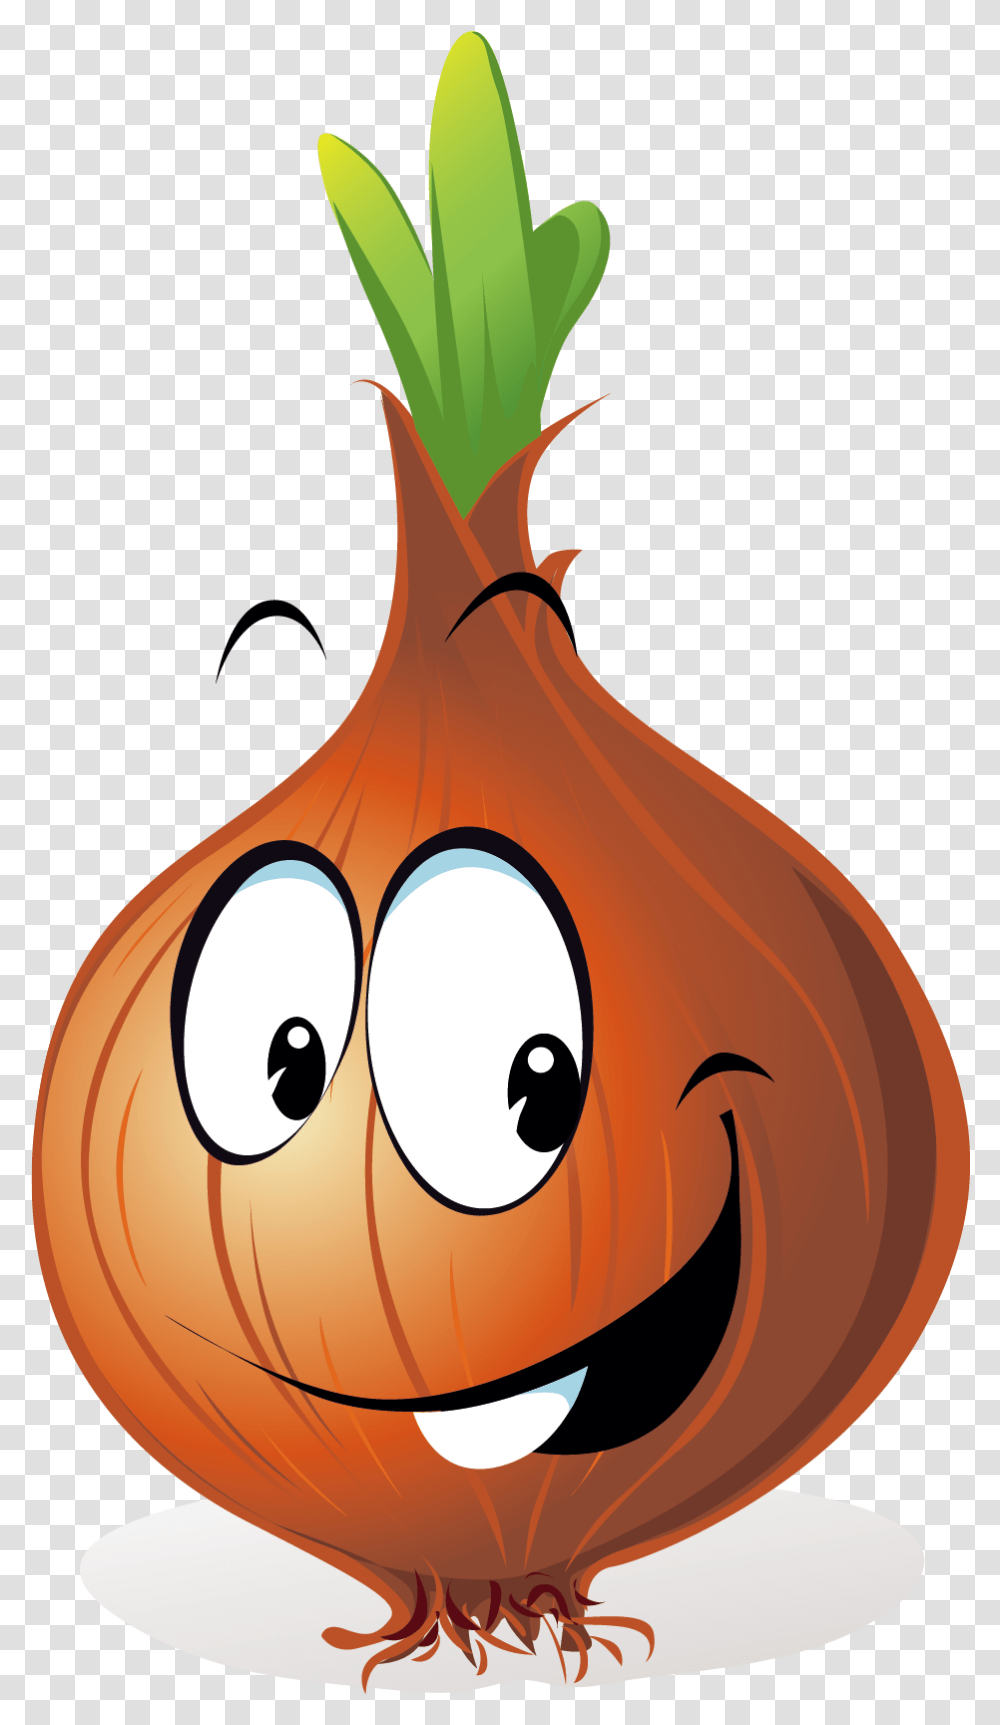 Onion Clipart Old Cartoons Fruits And Vegetables, Plant, Food, Produce, Grain Transparent Png